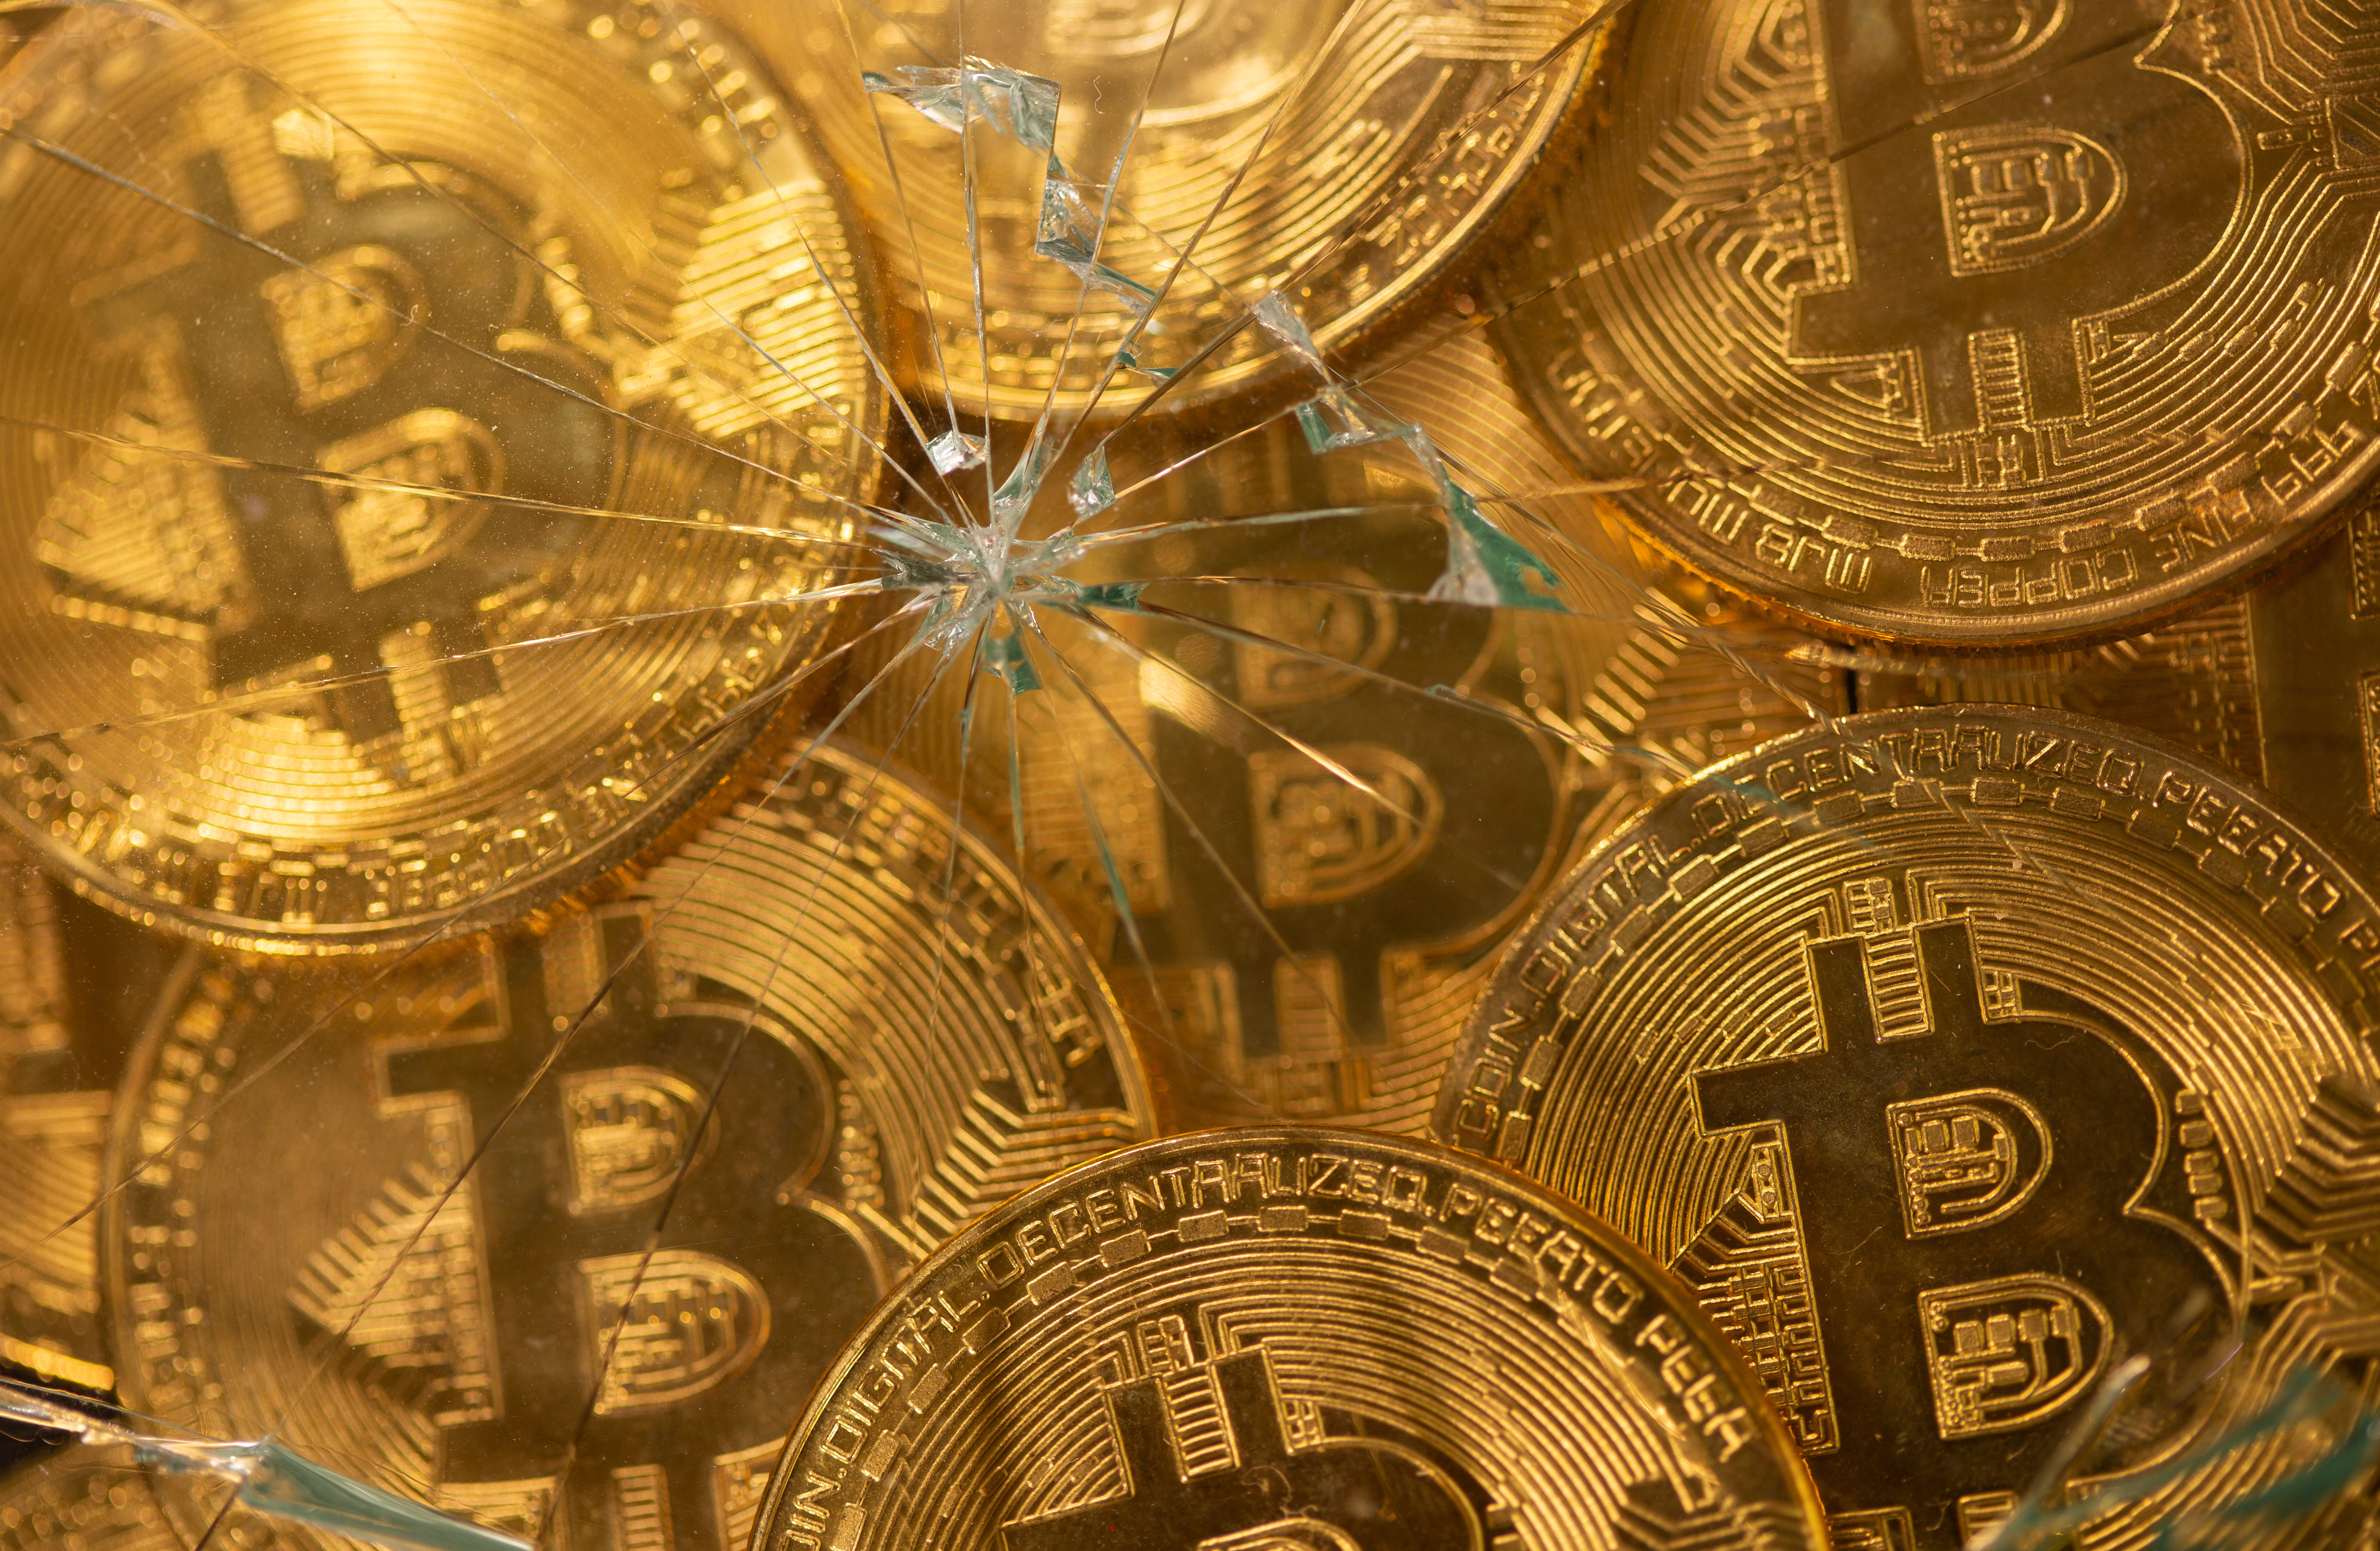 Representations of virtual currency bitcoin are seen through broken glass in this illustration